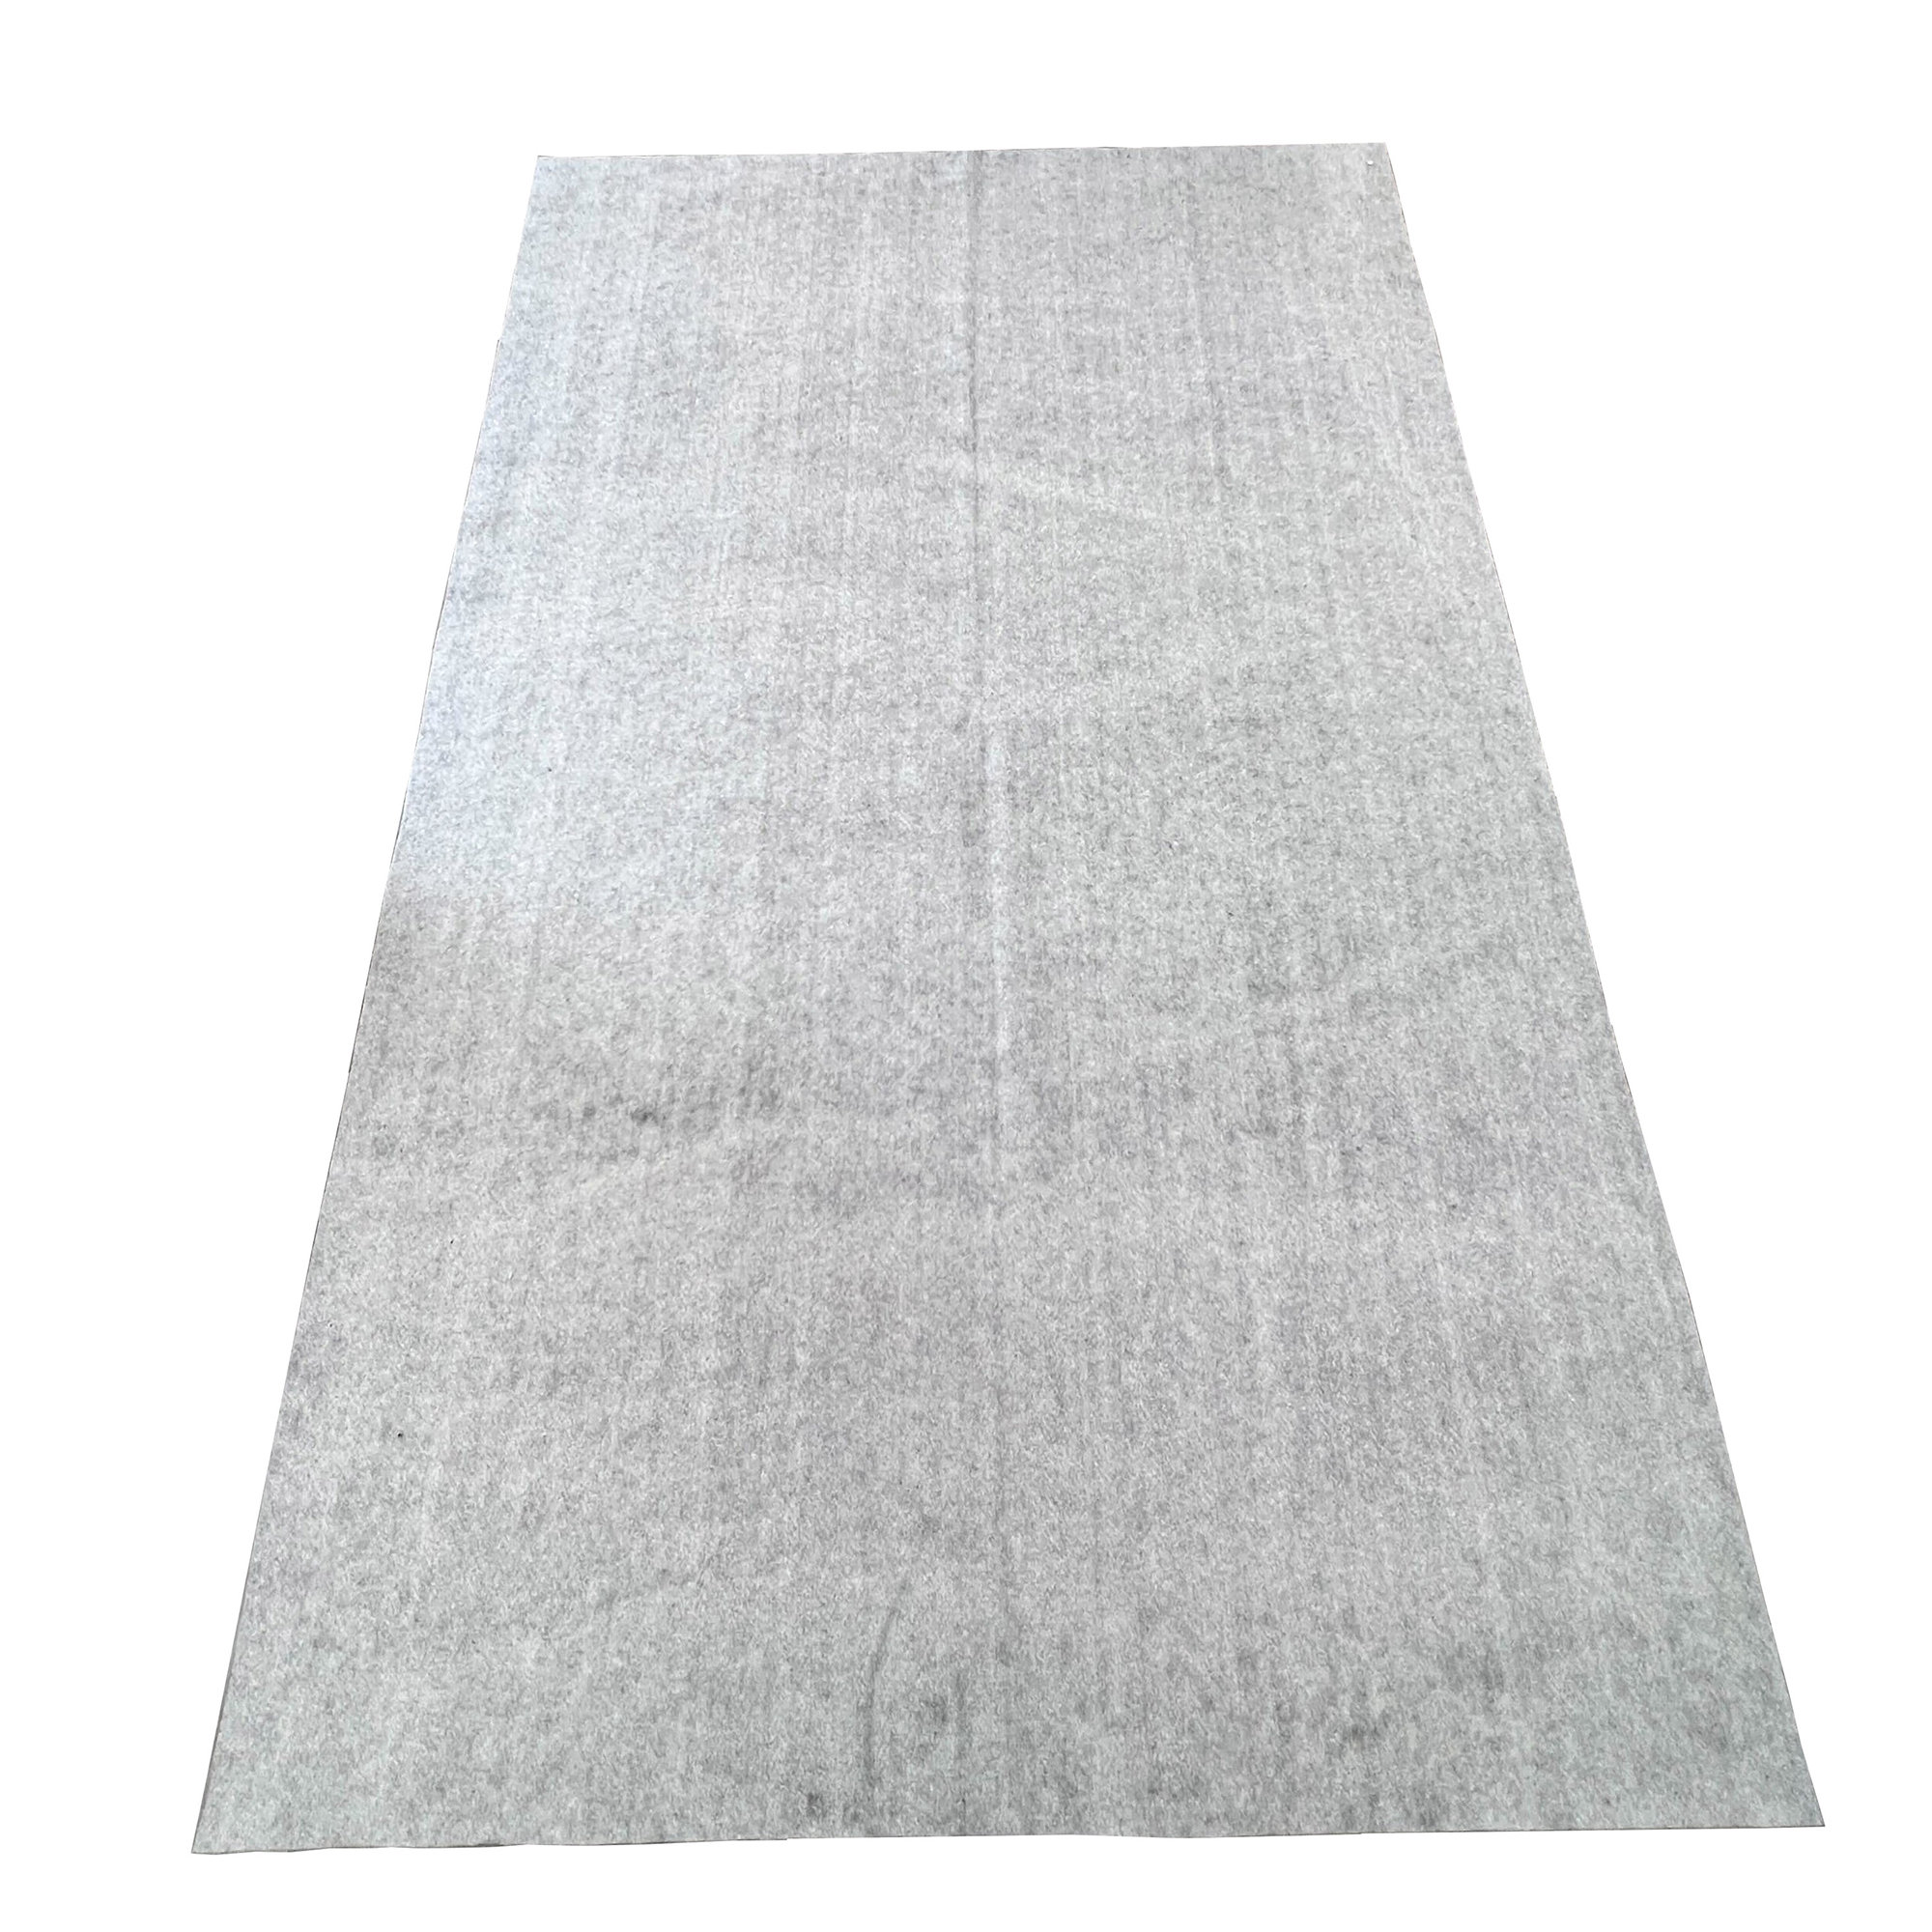 RugPadUSA - Dual Surface - 2'6 x 8' - 1/4 Thick - Felt + Rubber - Non-Slip Backing Rug Pad - Safe for All Floors